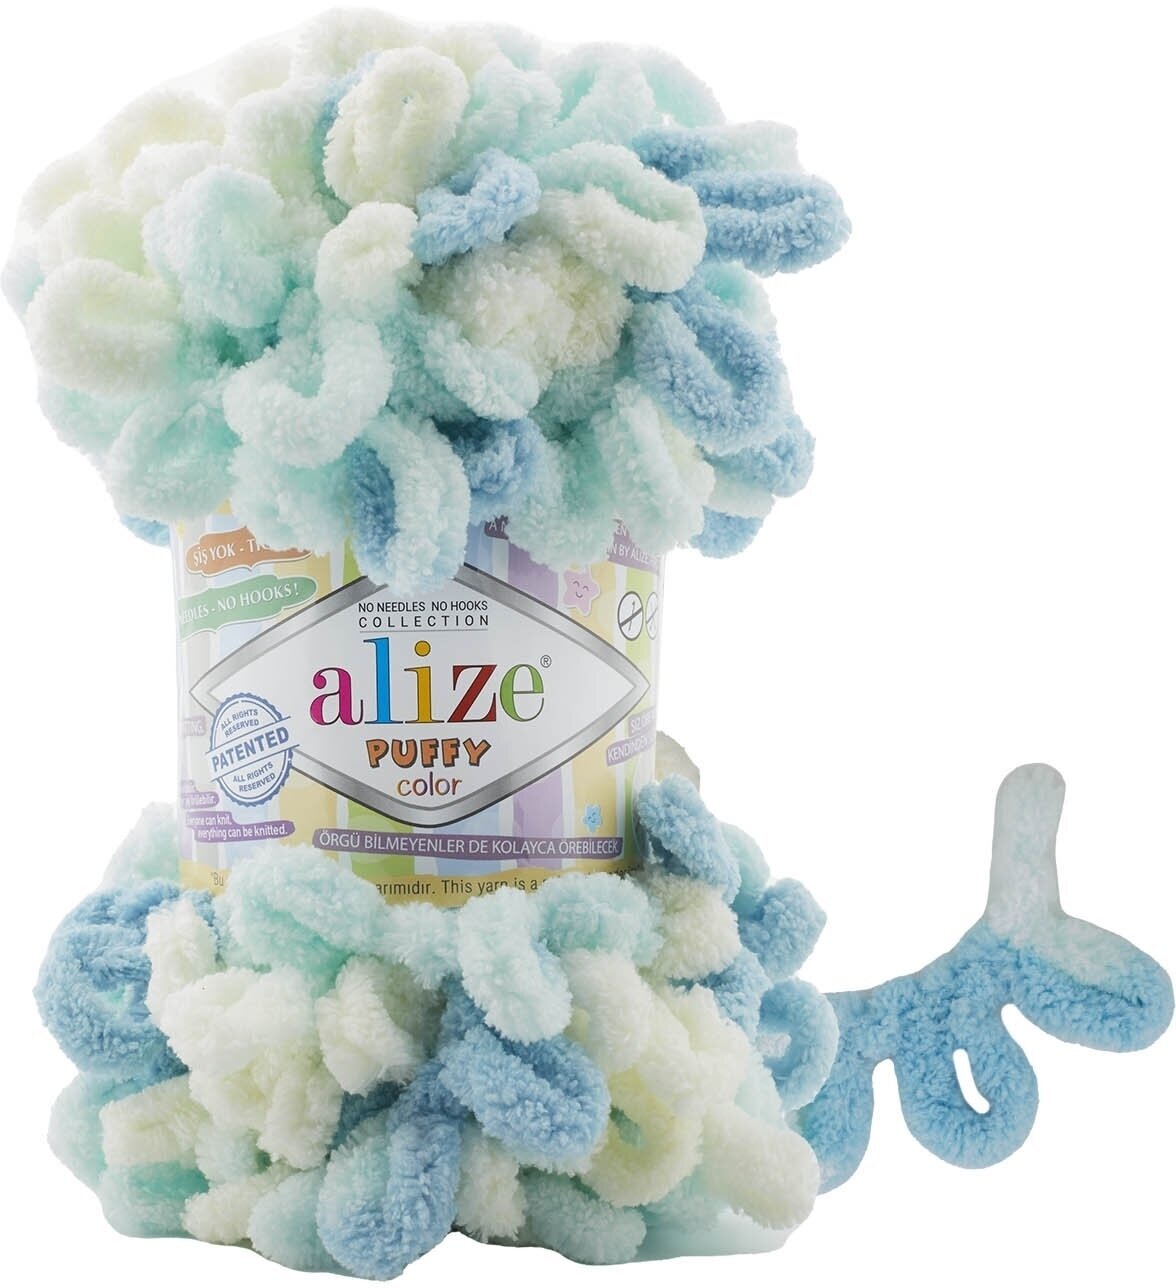 Breigaren Alize Puffy Color 6461